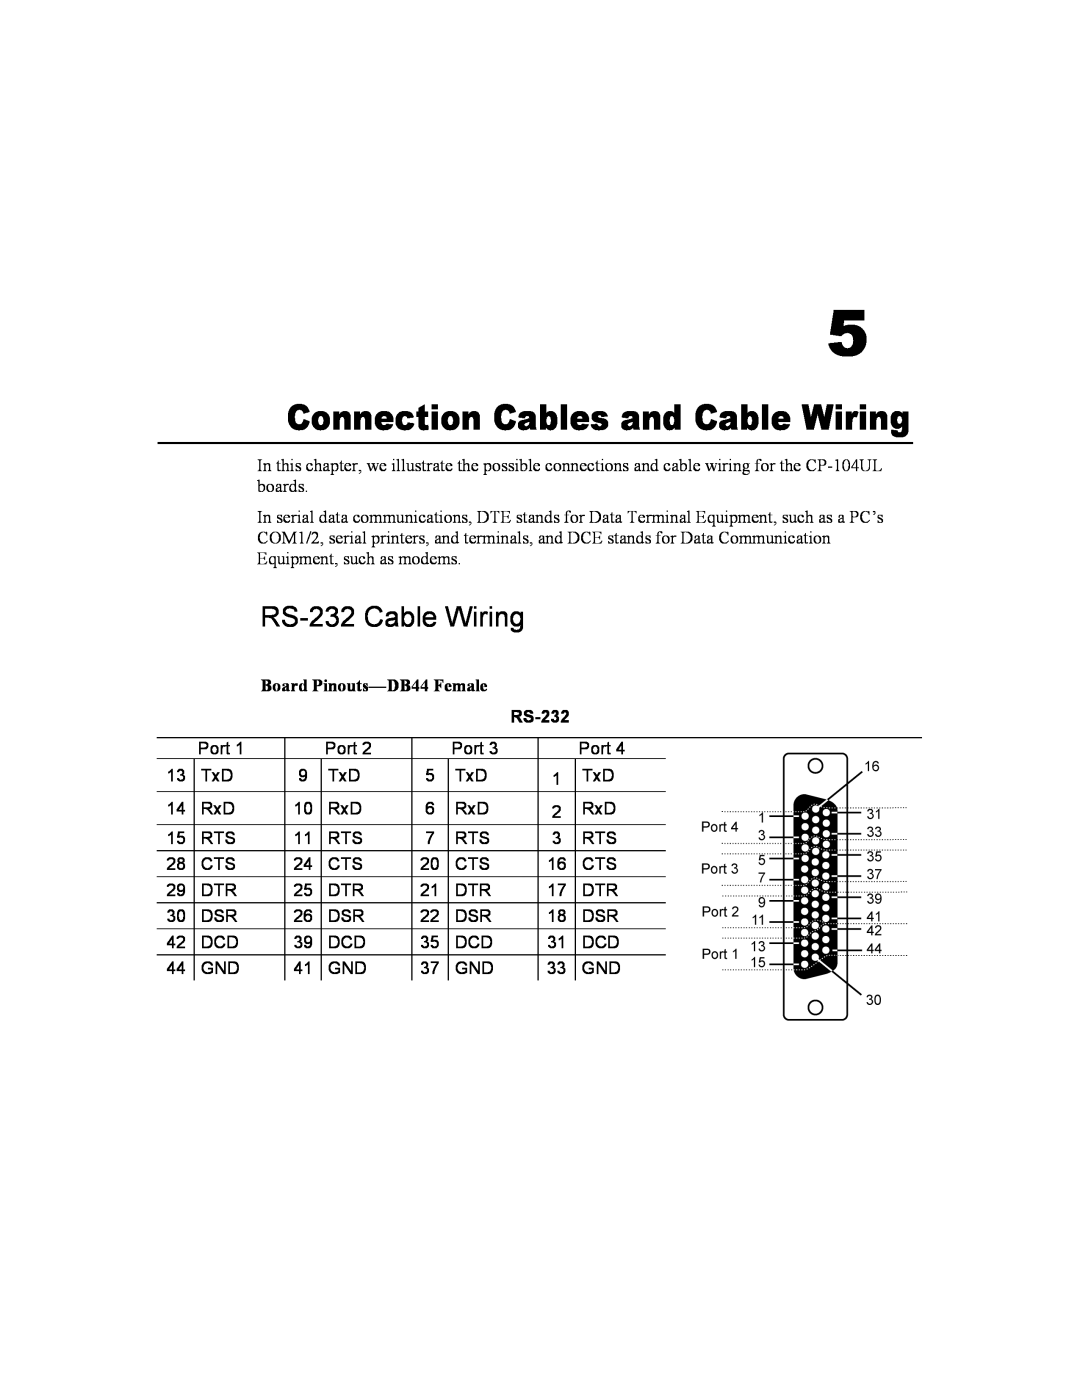 Moxa Technologies CP-104UL user manual Connection Cables and Cable Wiring, RS-232 Cable Wiring, Board Pinouts-DB44 Female 